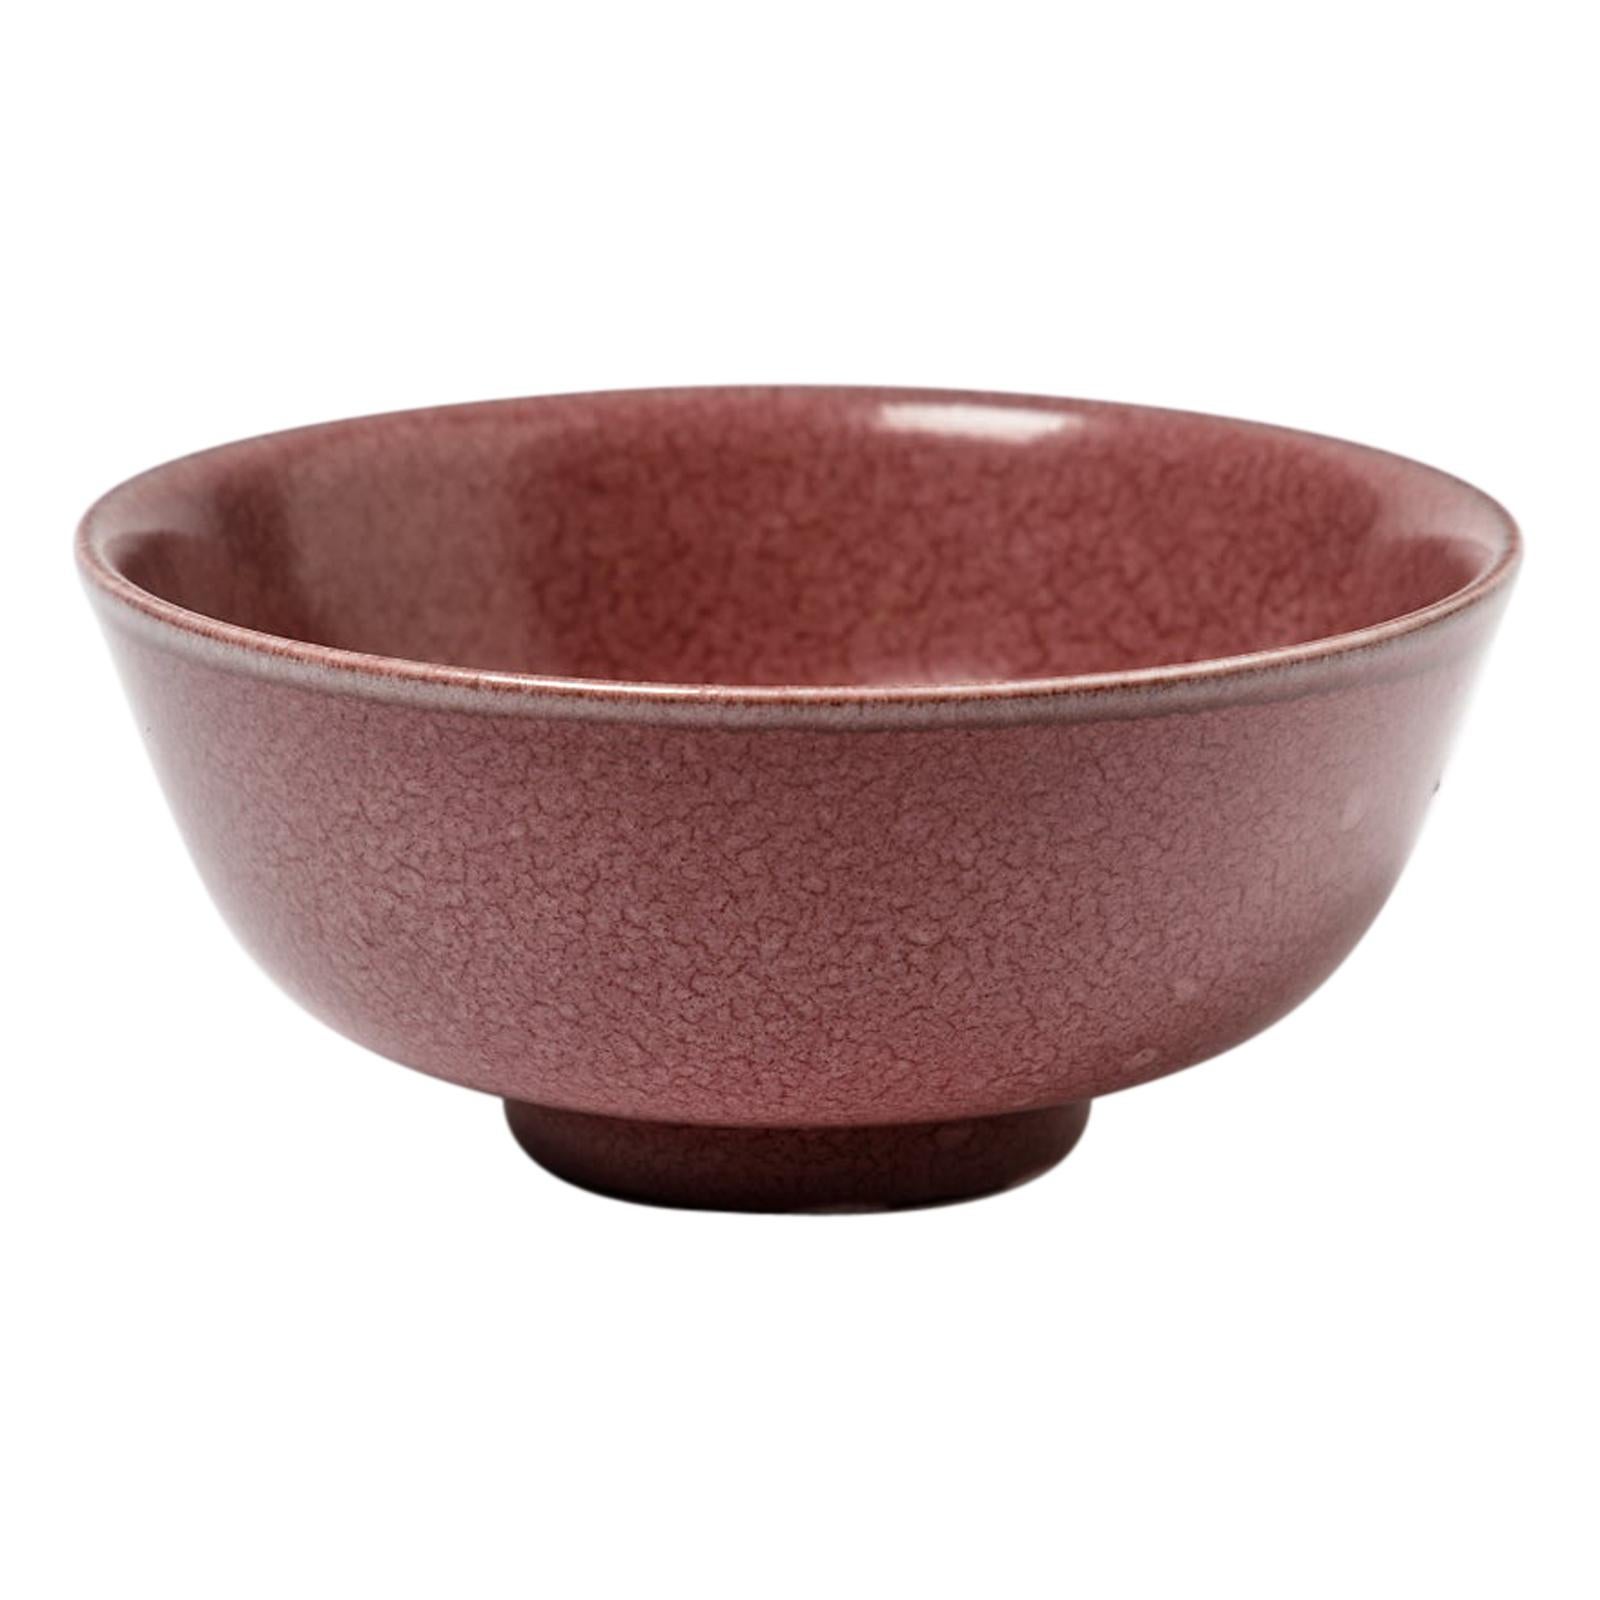 Pink or Red Glazed Porcelain Ceramic Bowl or Cup by Marc Uzan, circa 2010 For Sale